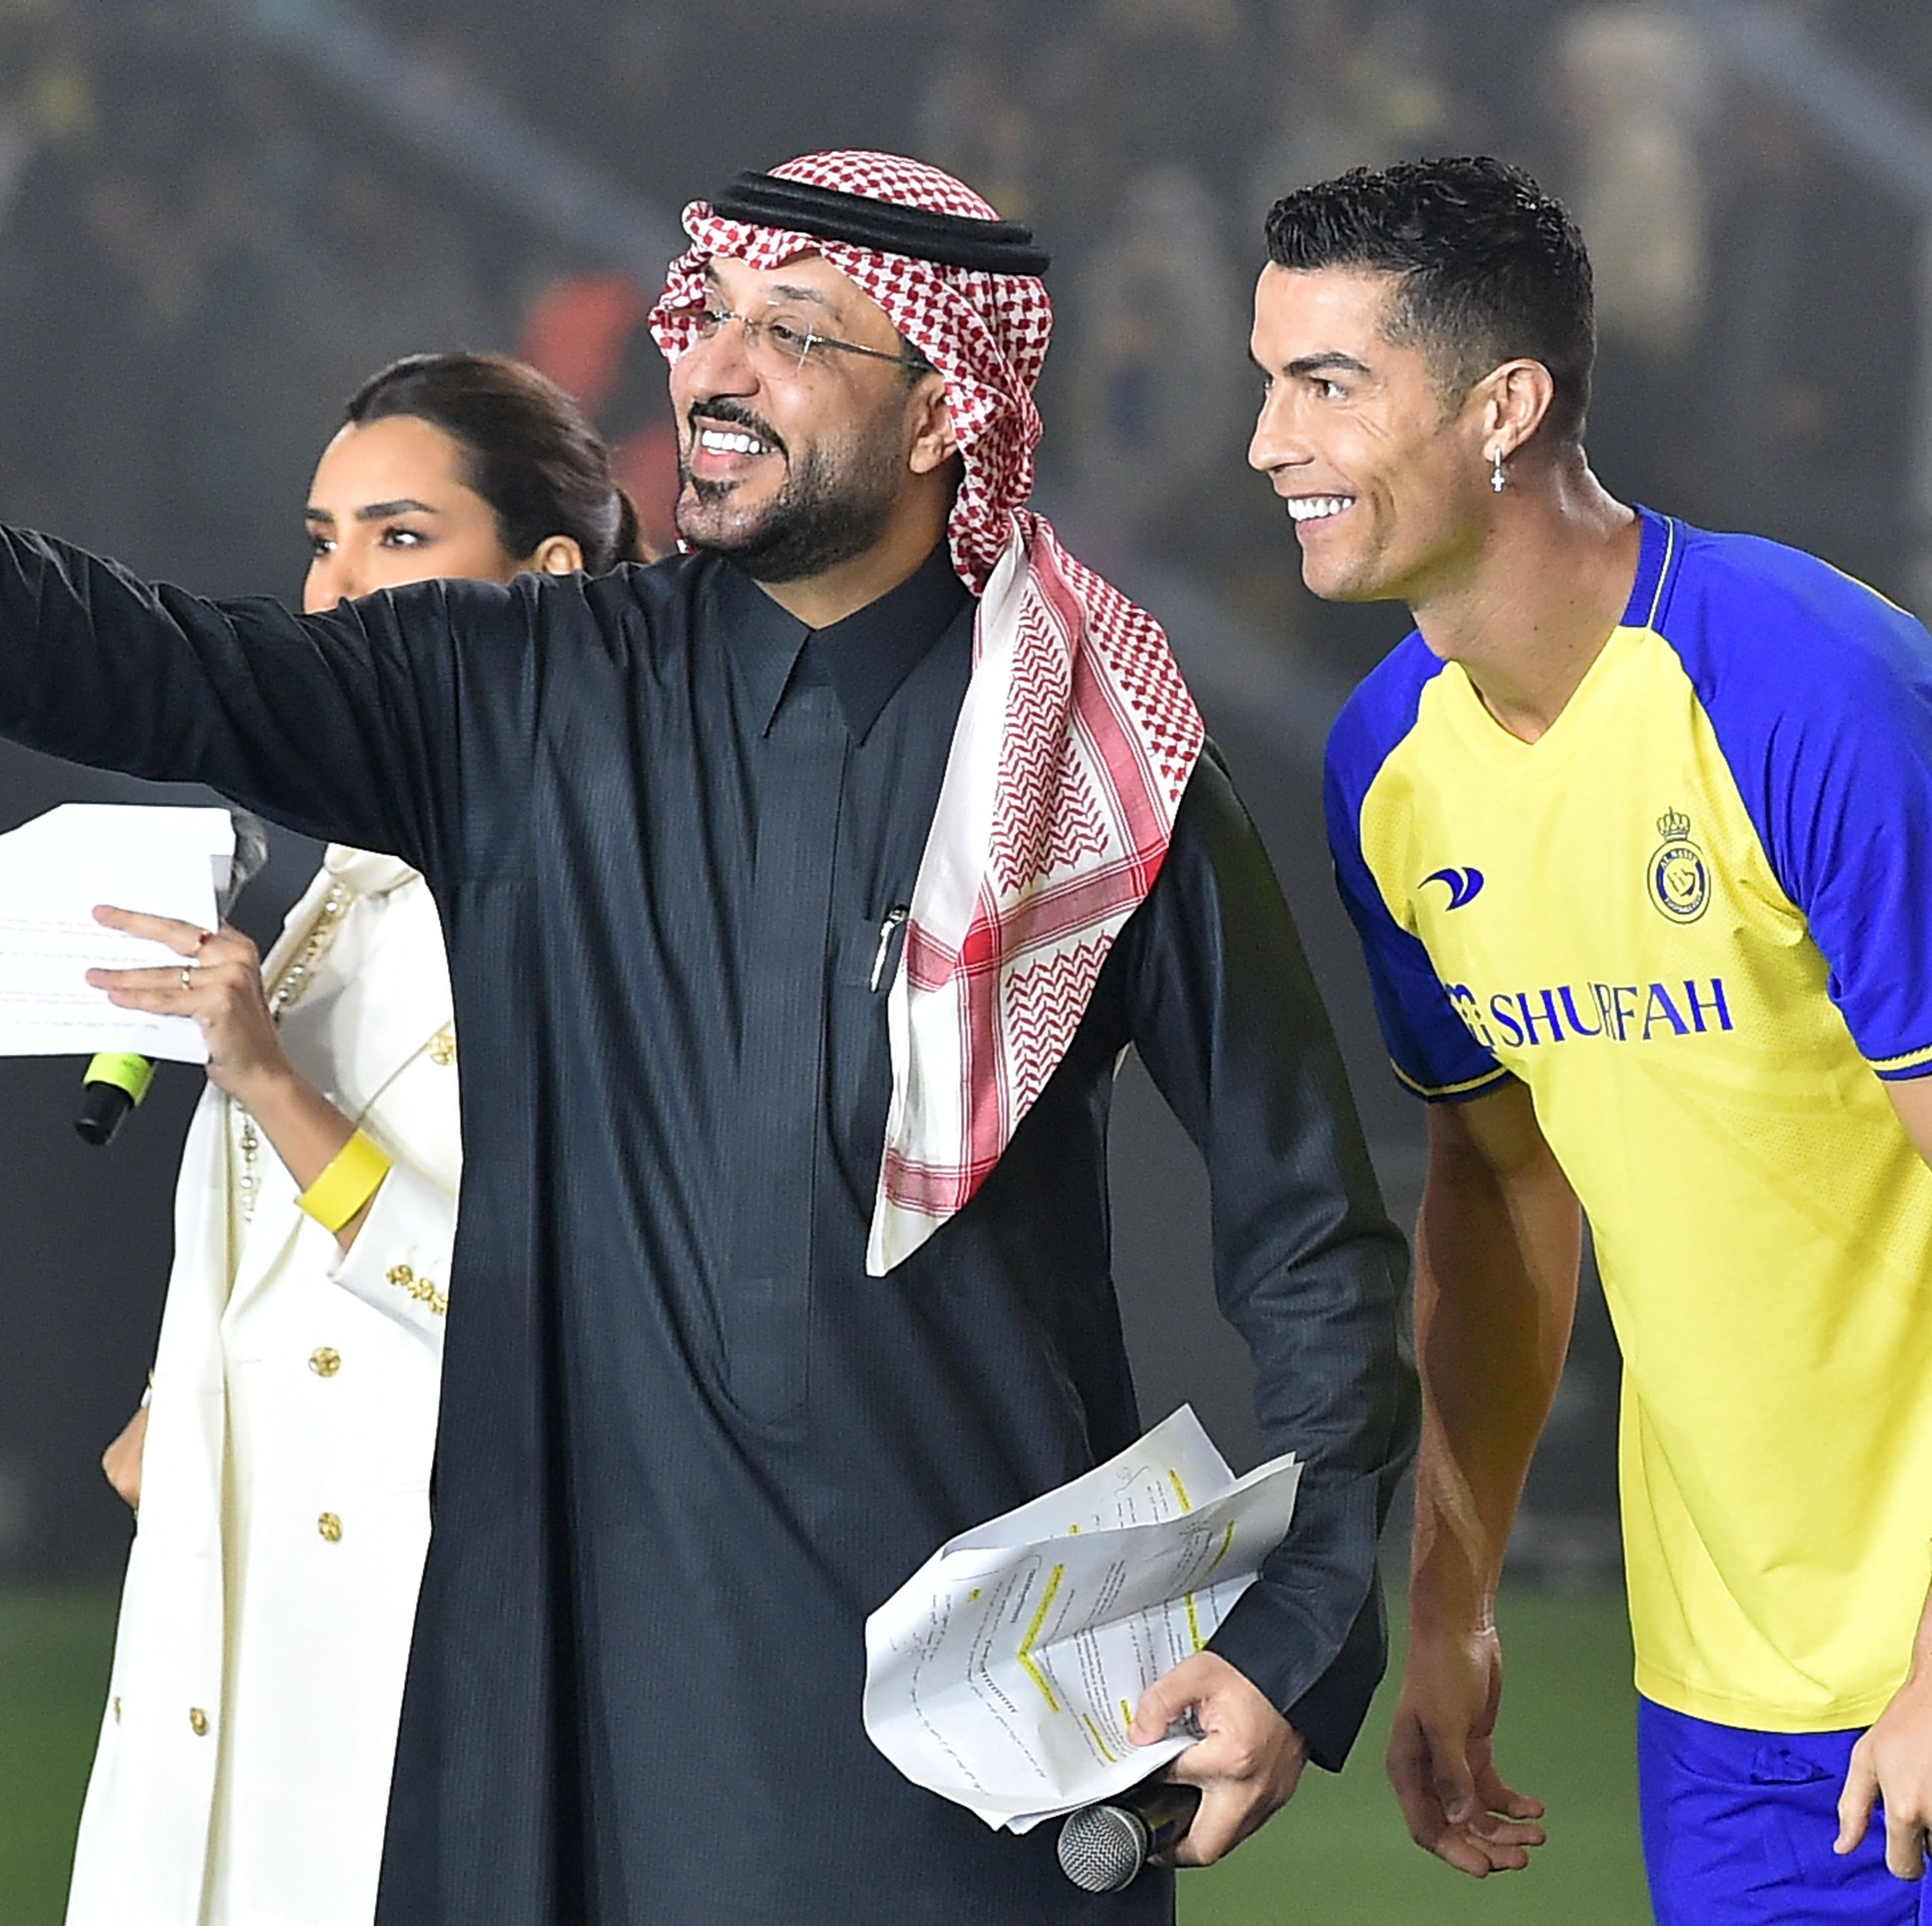 Saudi Arabia and Cristiano Ronaldo Have Sparked a Money-Drenched Tug-of-War in World Soccer